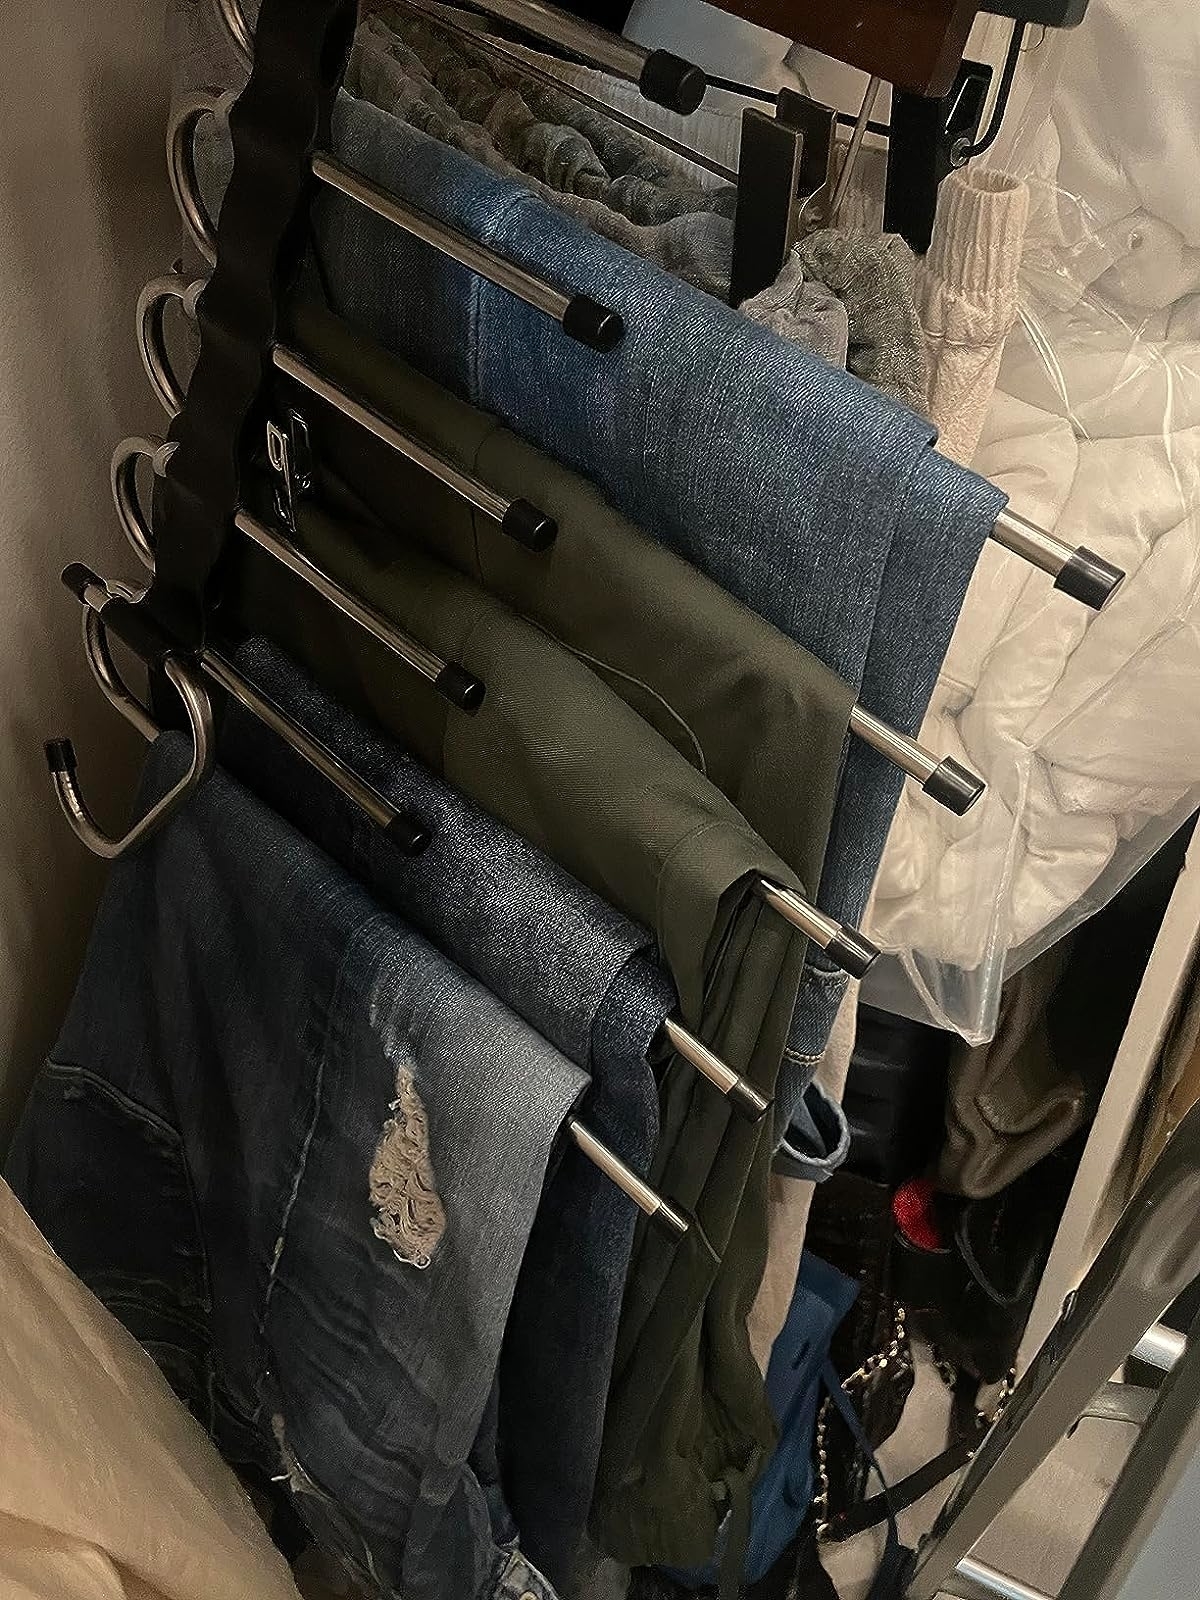 Reviewer image of jeans hanging on the pants hanger